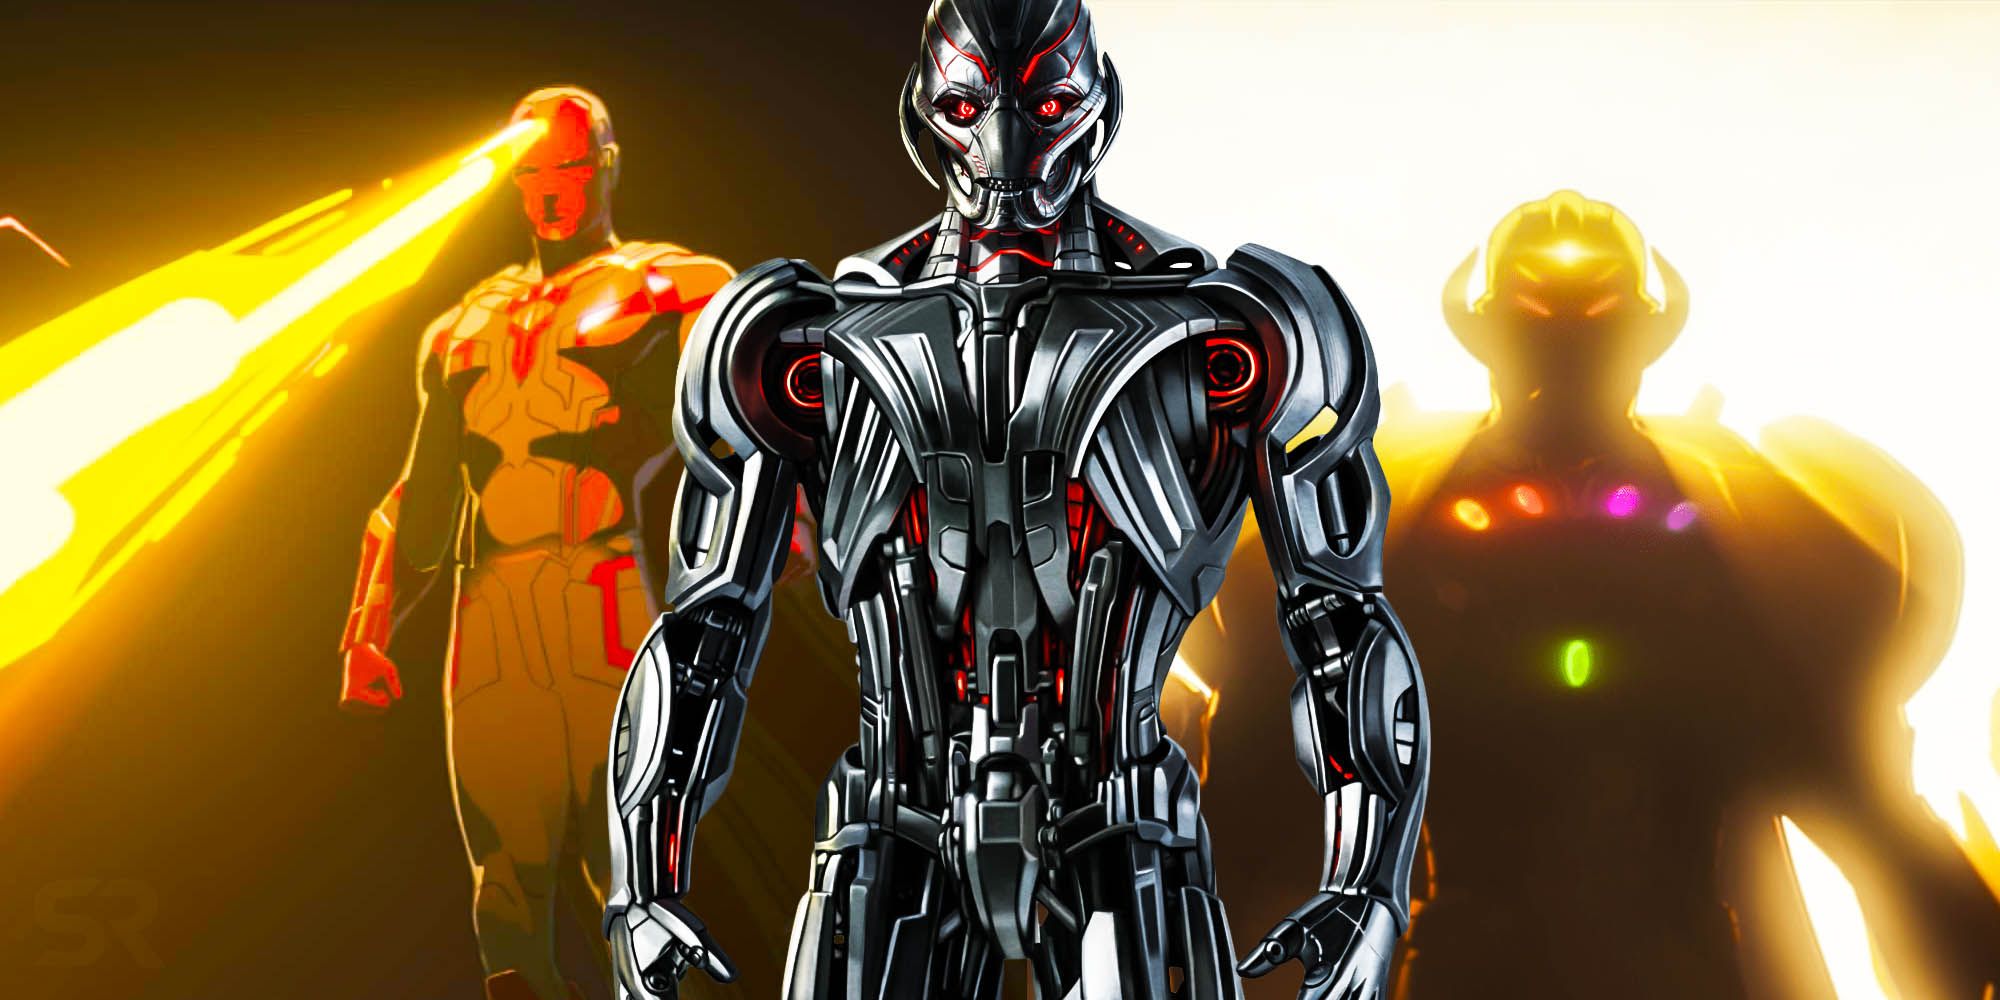 What if Ultron got his vision body